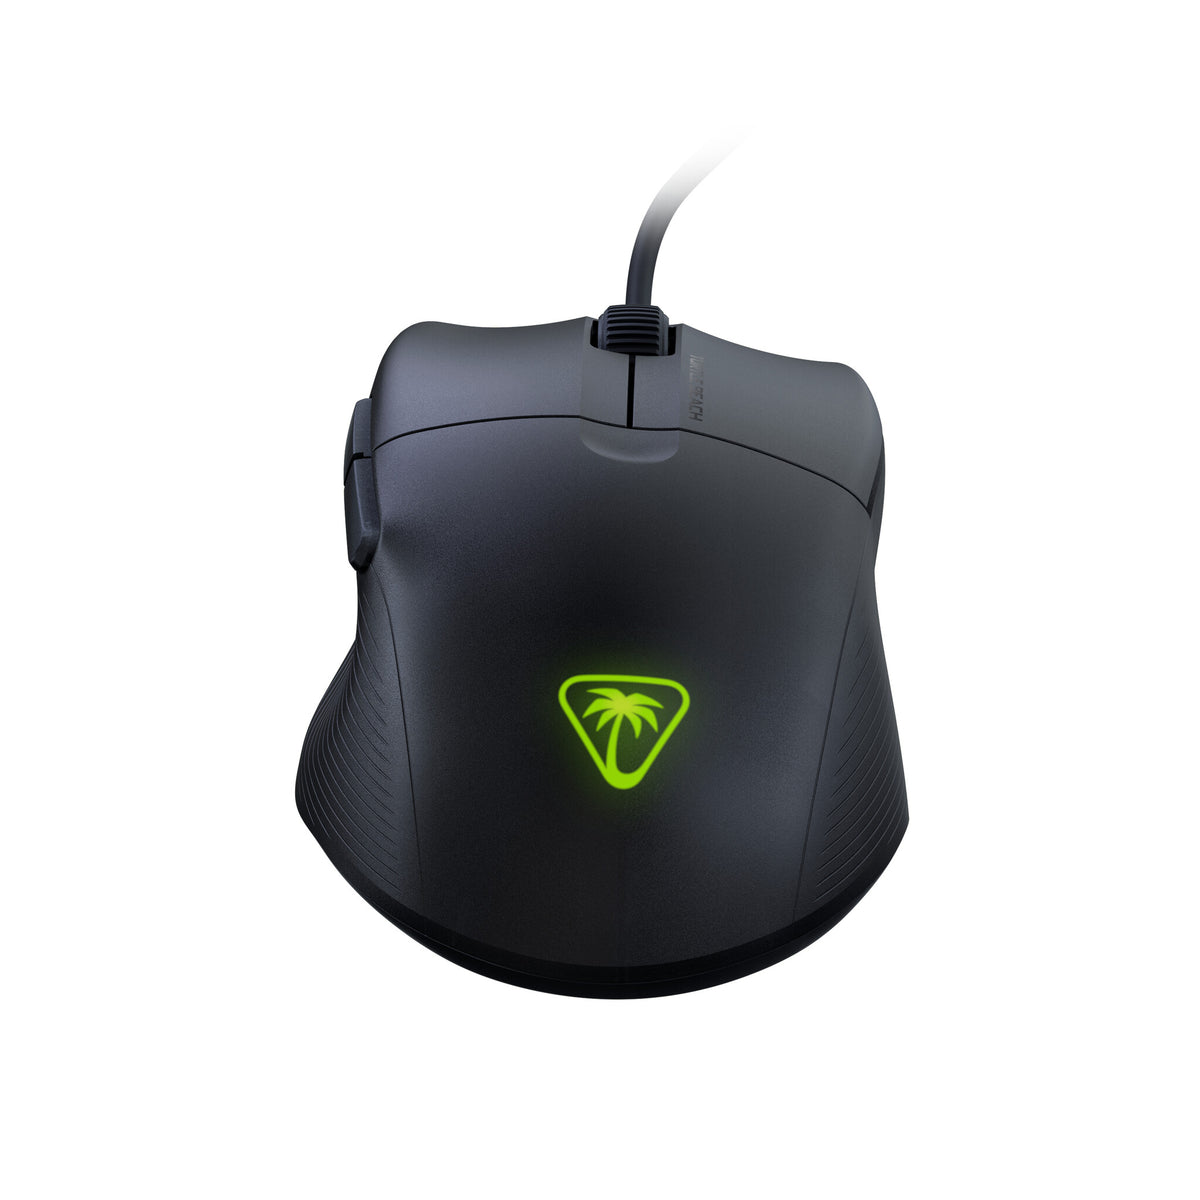 Turtle Beach Pure SEL - Ultra-Light RGB Gaming Mouse in Black - 8,000 DPI